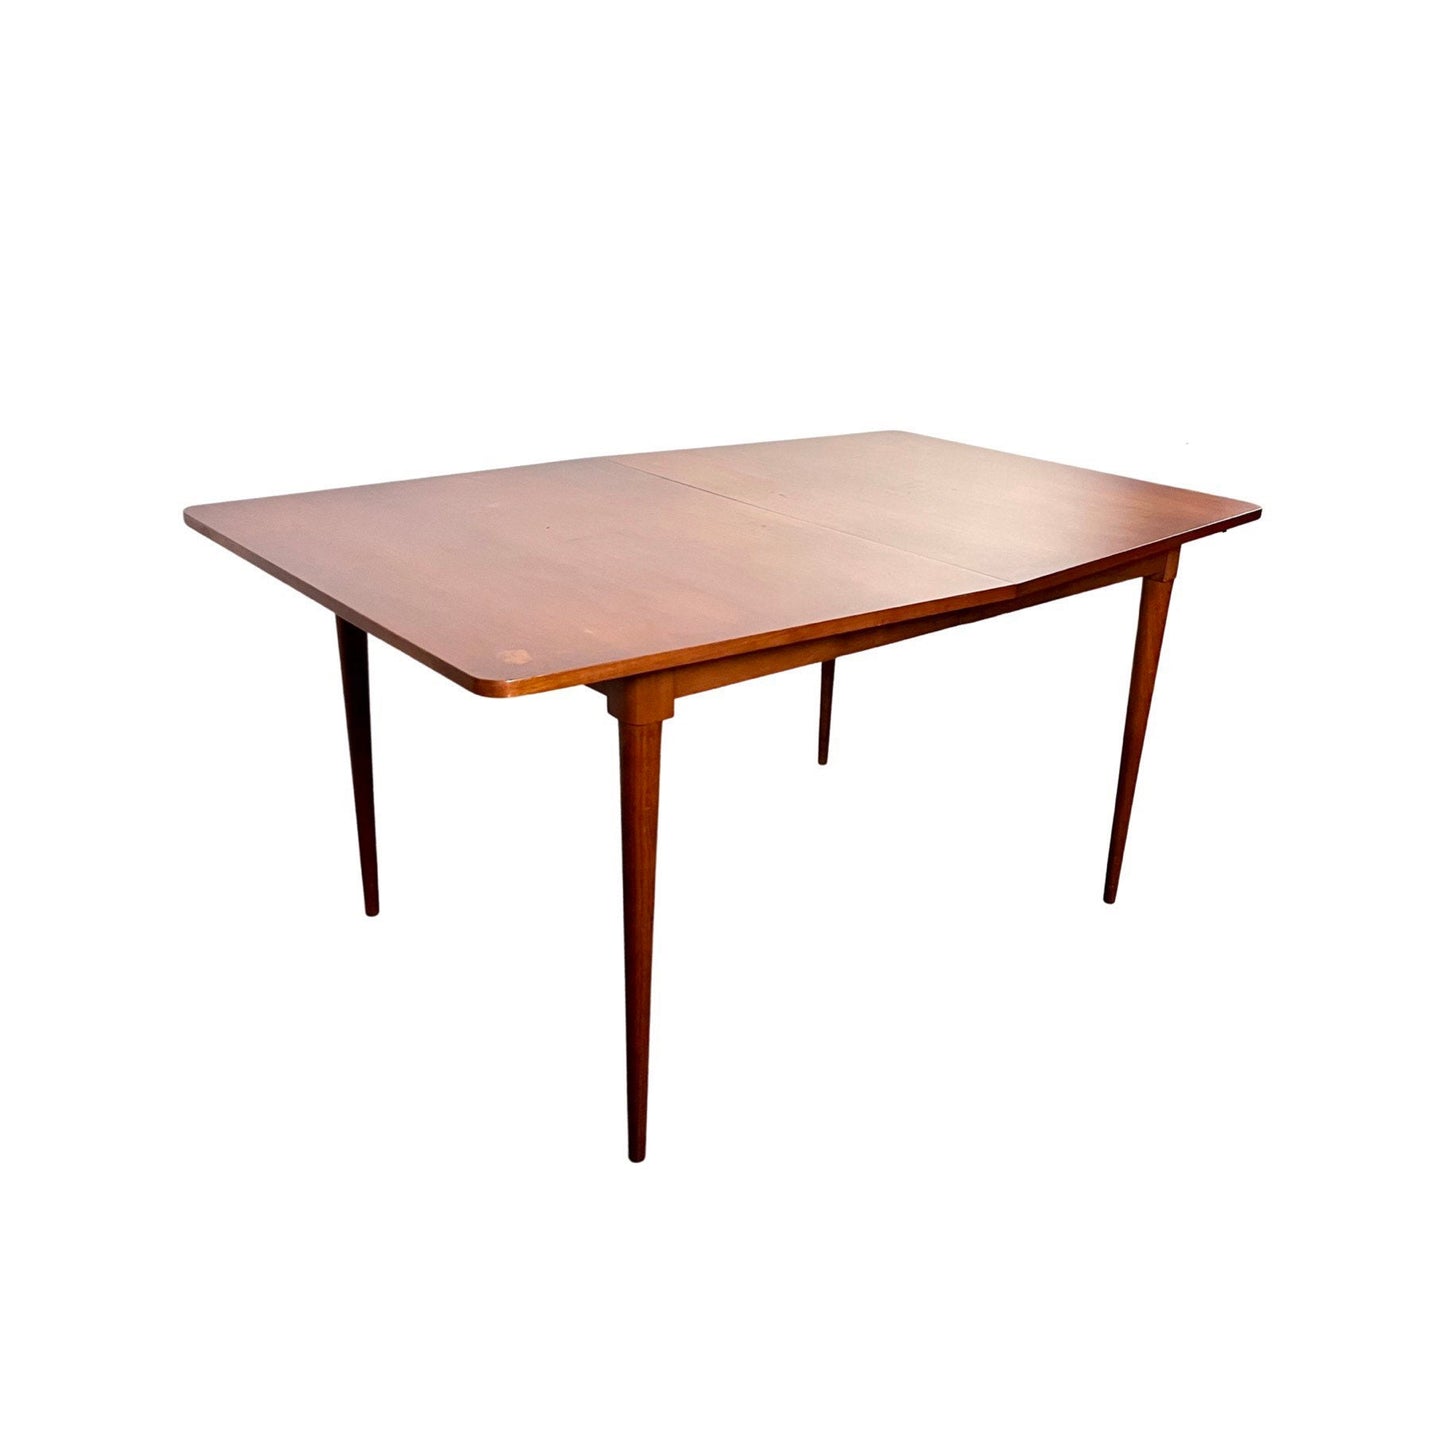 Young Manufacturing Mid Century Modern Dining Table with 2 Leaves c. 1960s